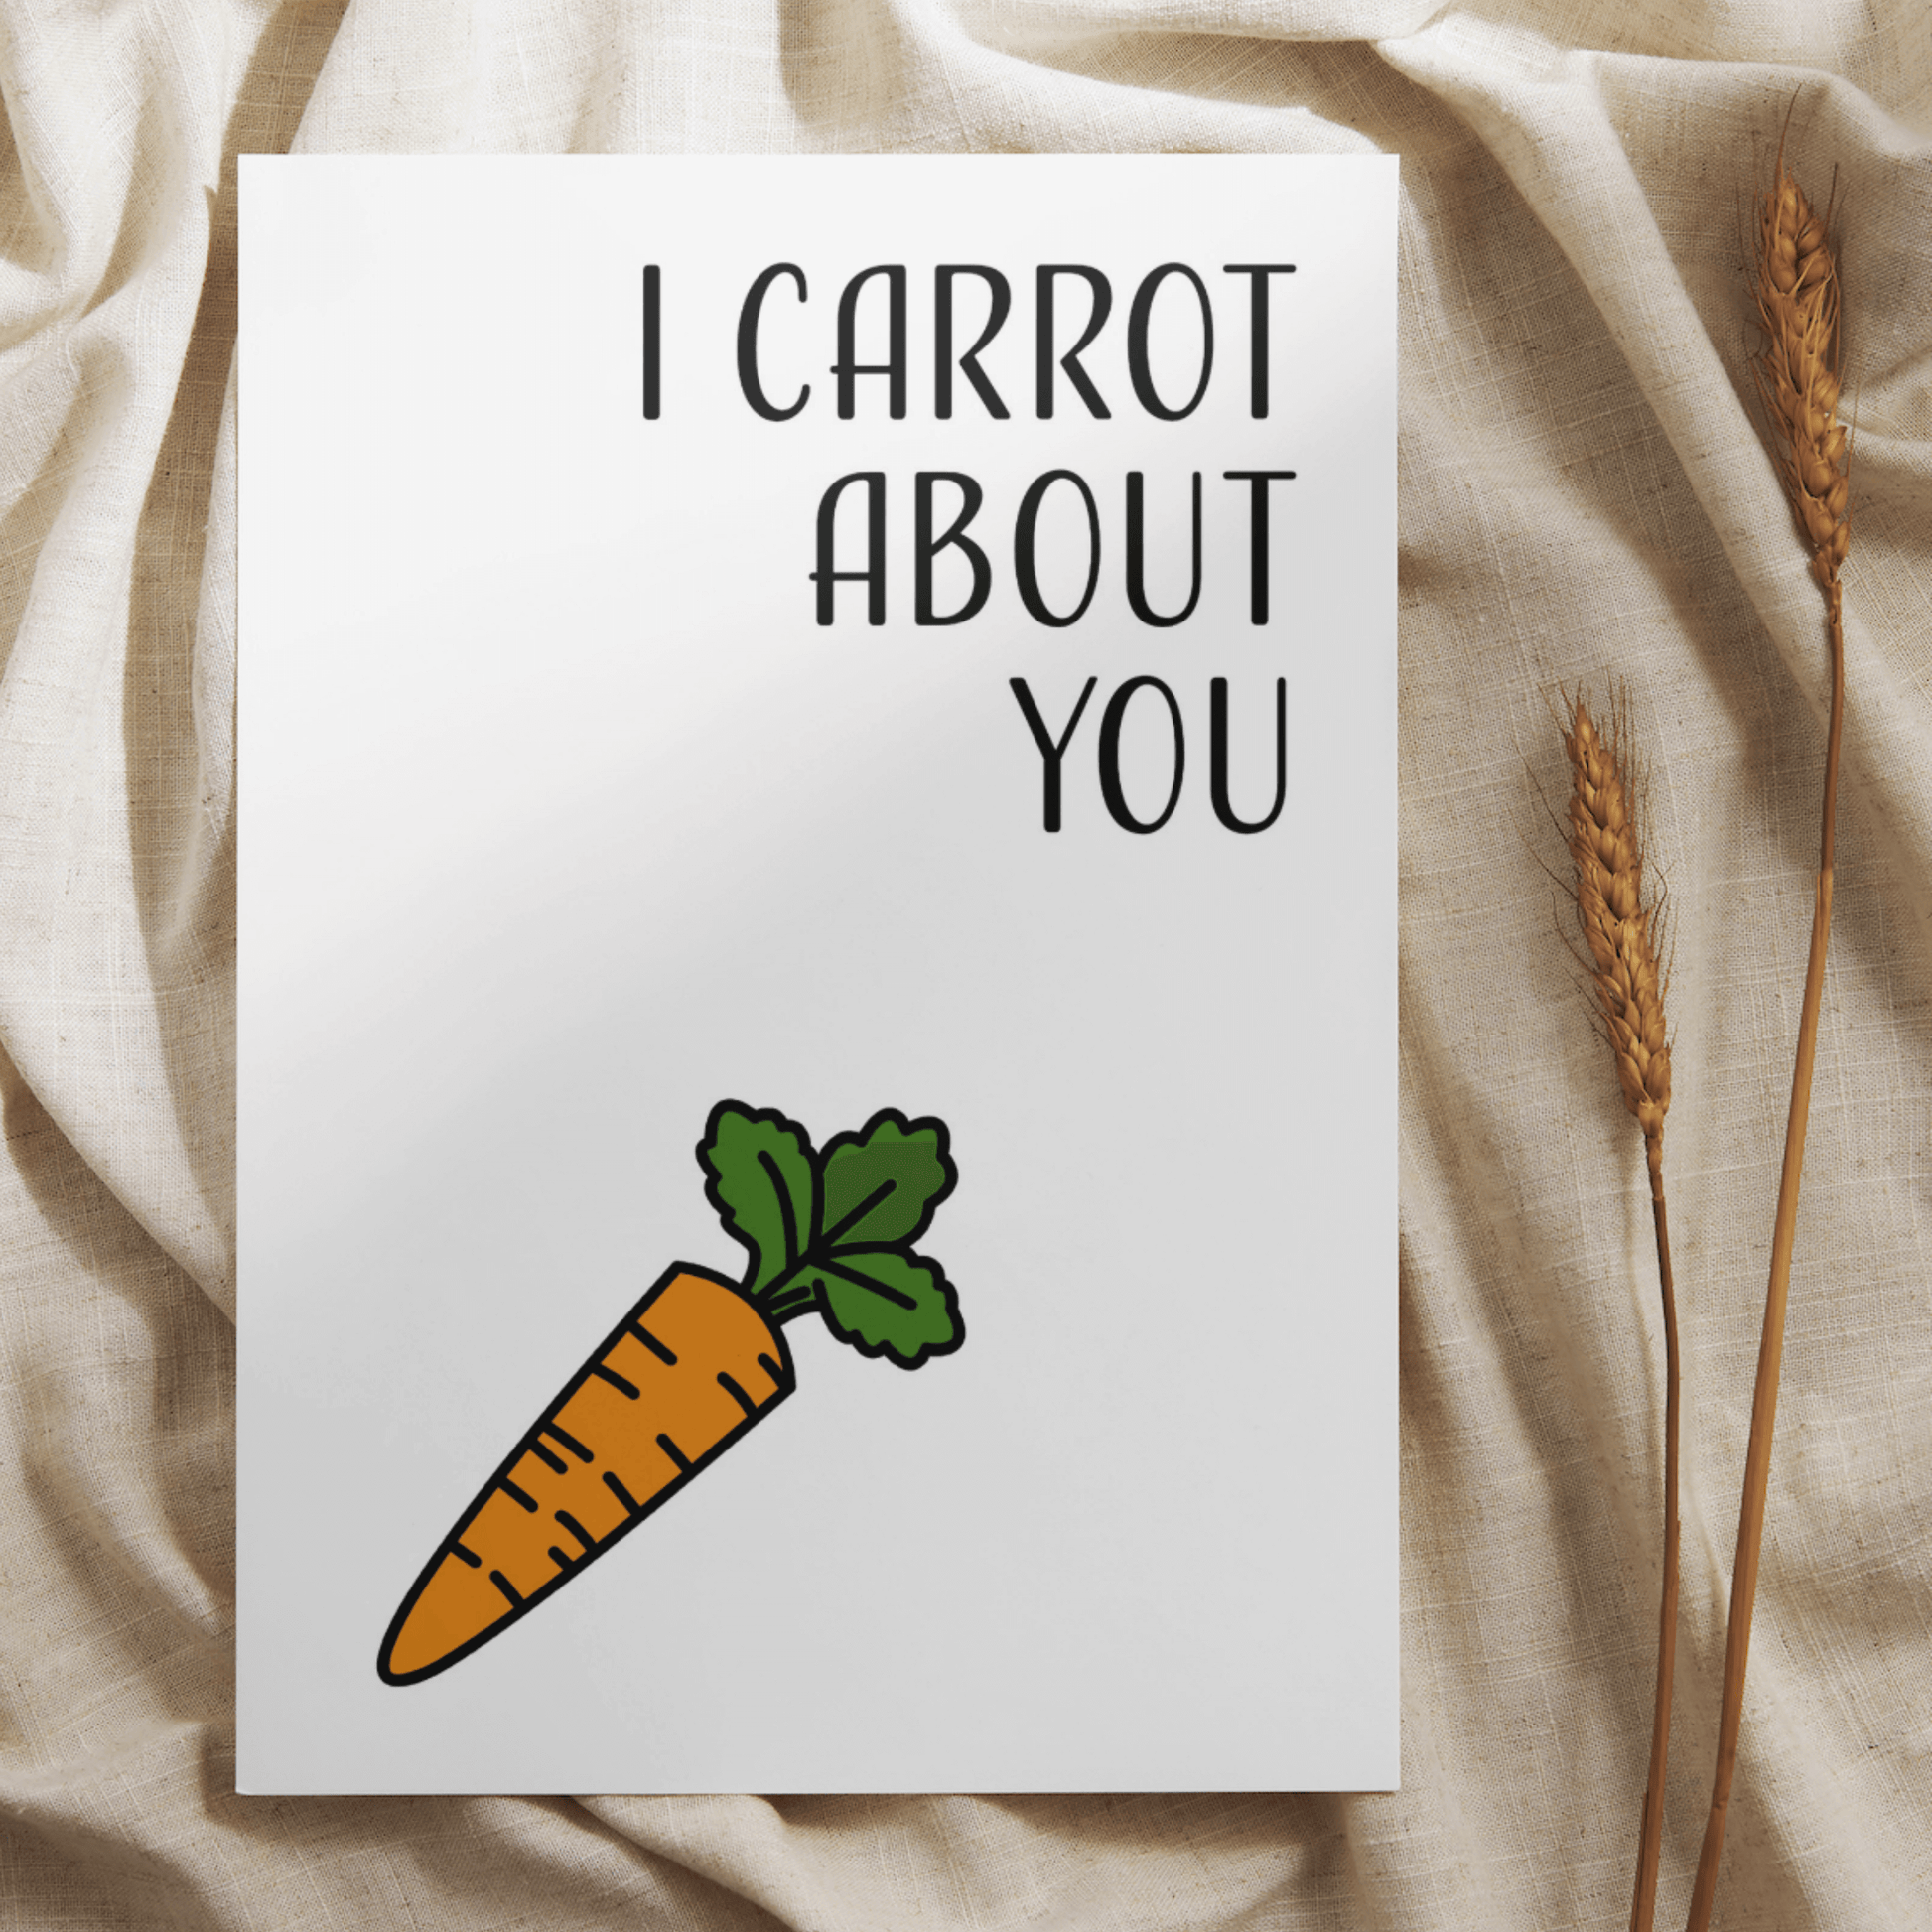 Little Kraken's I Carrot About You, Love Cards for £3.50 each